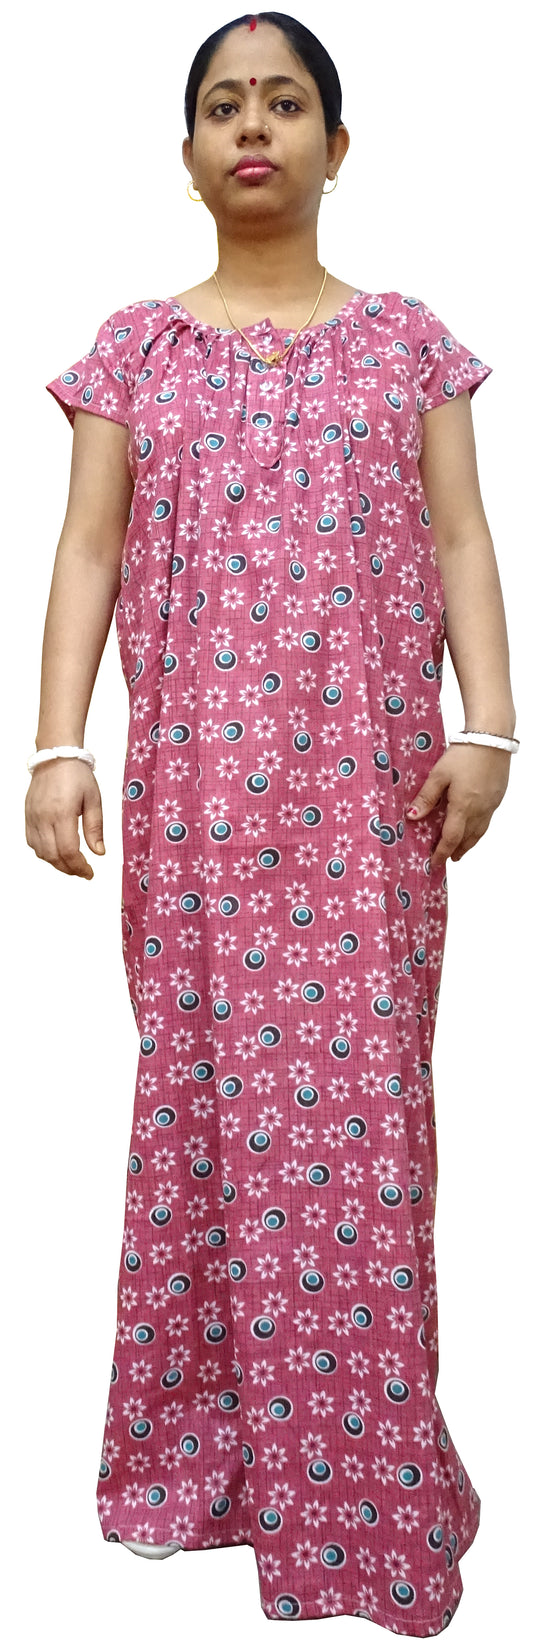 Nighty for Women Cotton Printed, Free Size, Pink with Blue dots (Pack of 1)